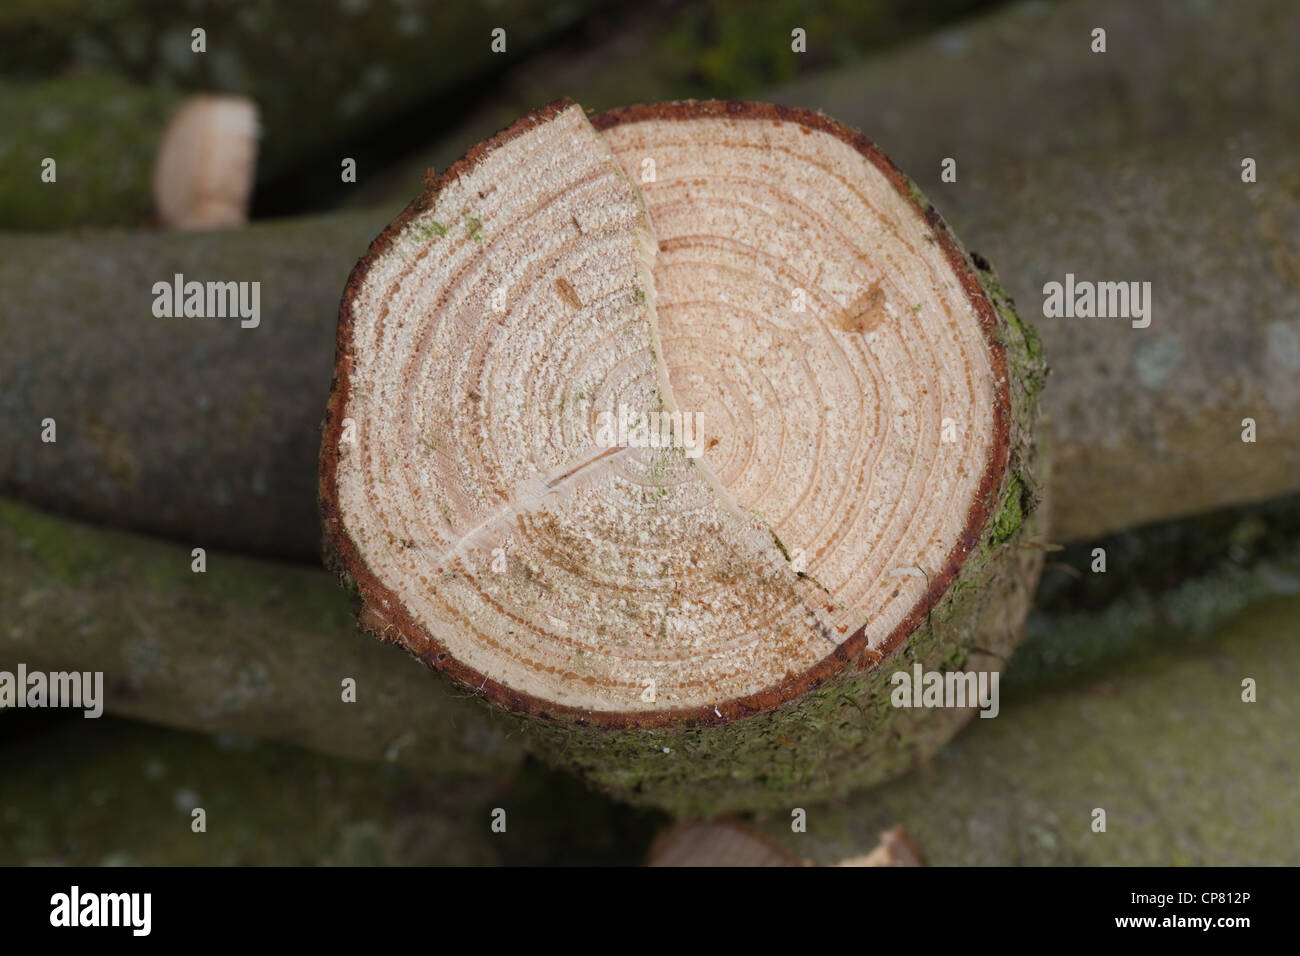 Norway Spruce (Picea abies). Cross section of recently sawn trunk. Showing annual growth rings. Stock Photo